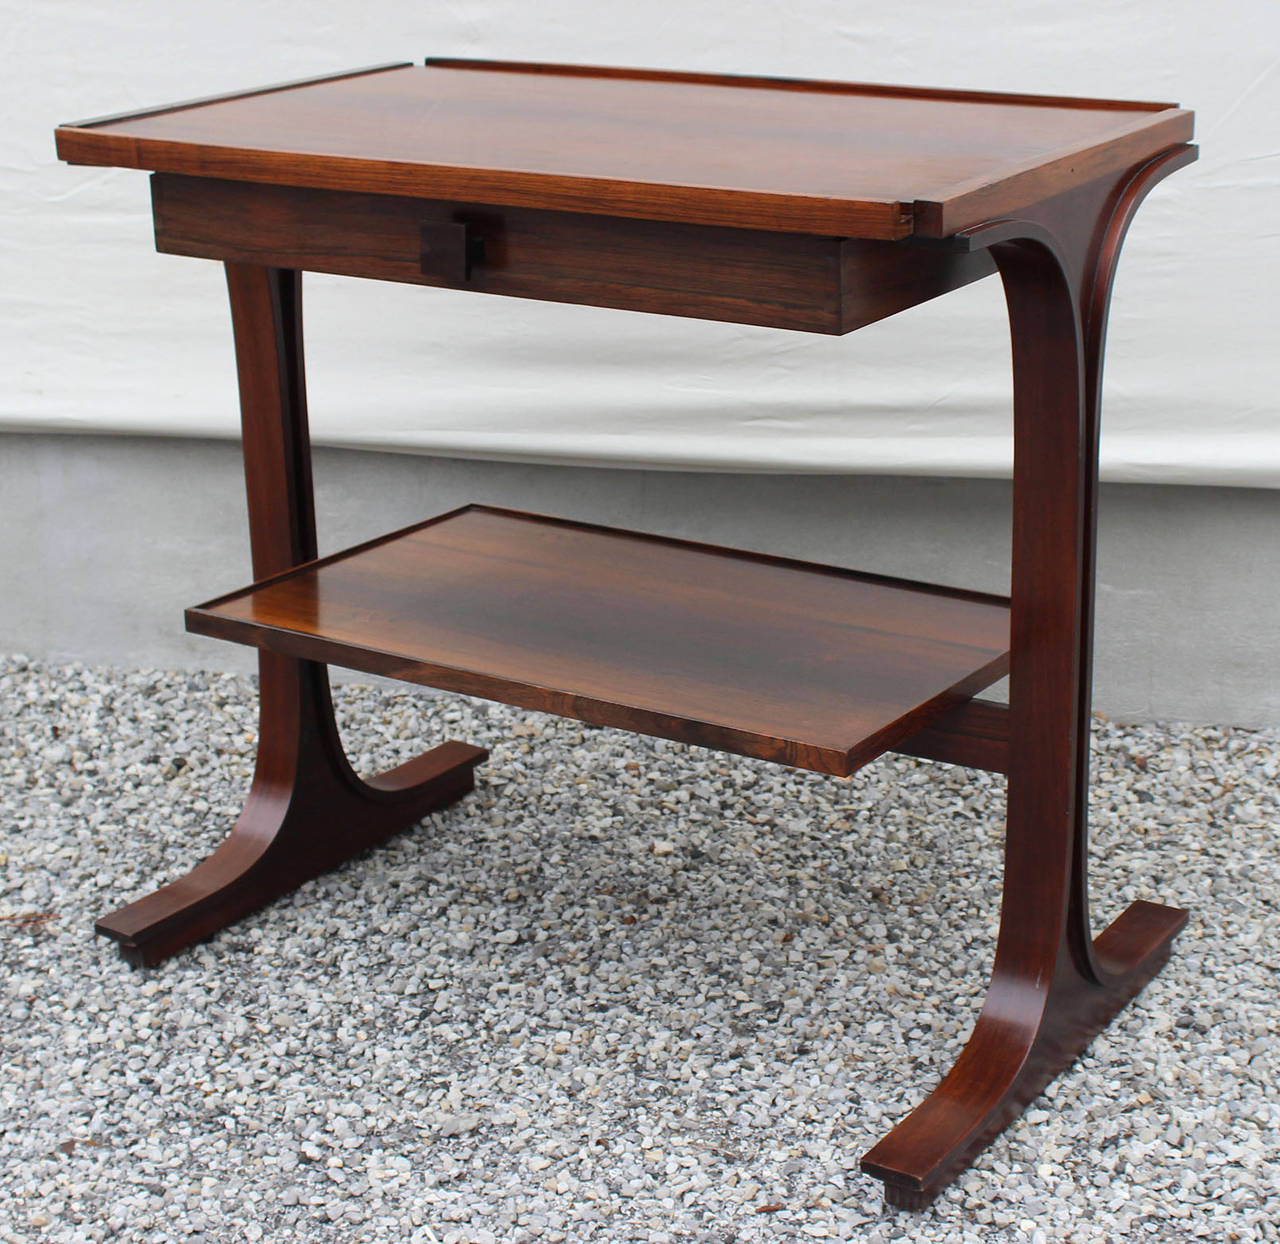 A rosewood writing or side table with drawer designed by Gianfranco Frattini for Bernini.

complimentary delivery within Hamptons.